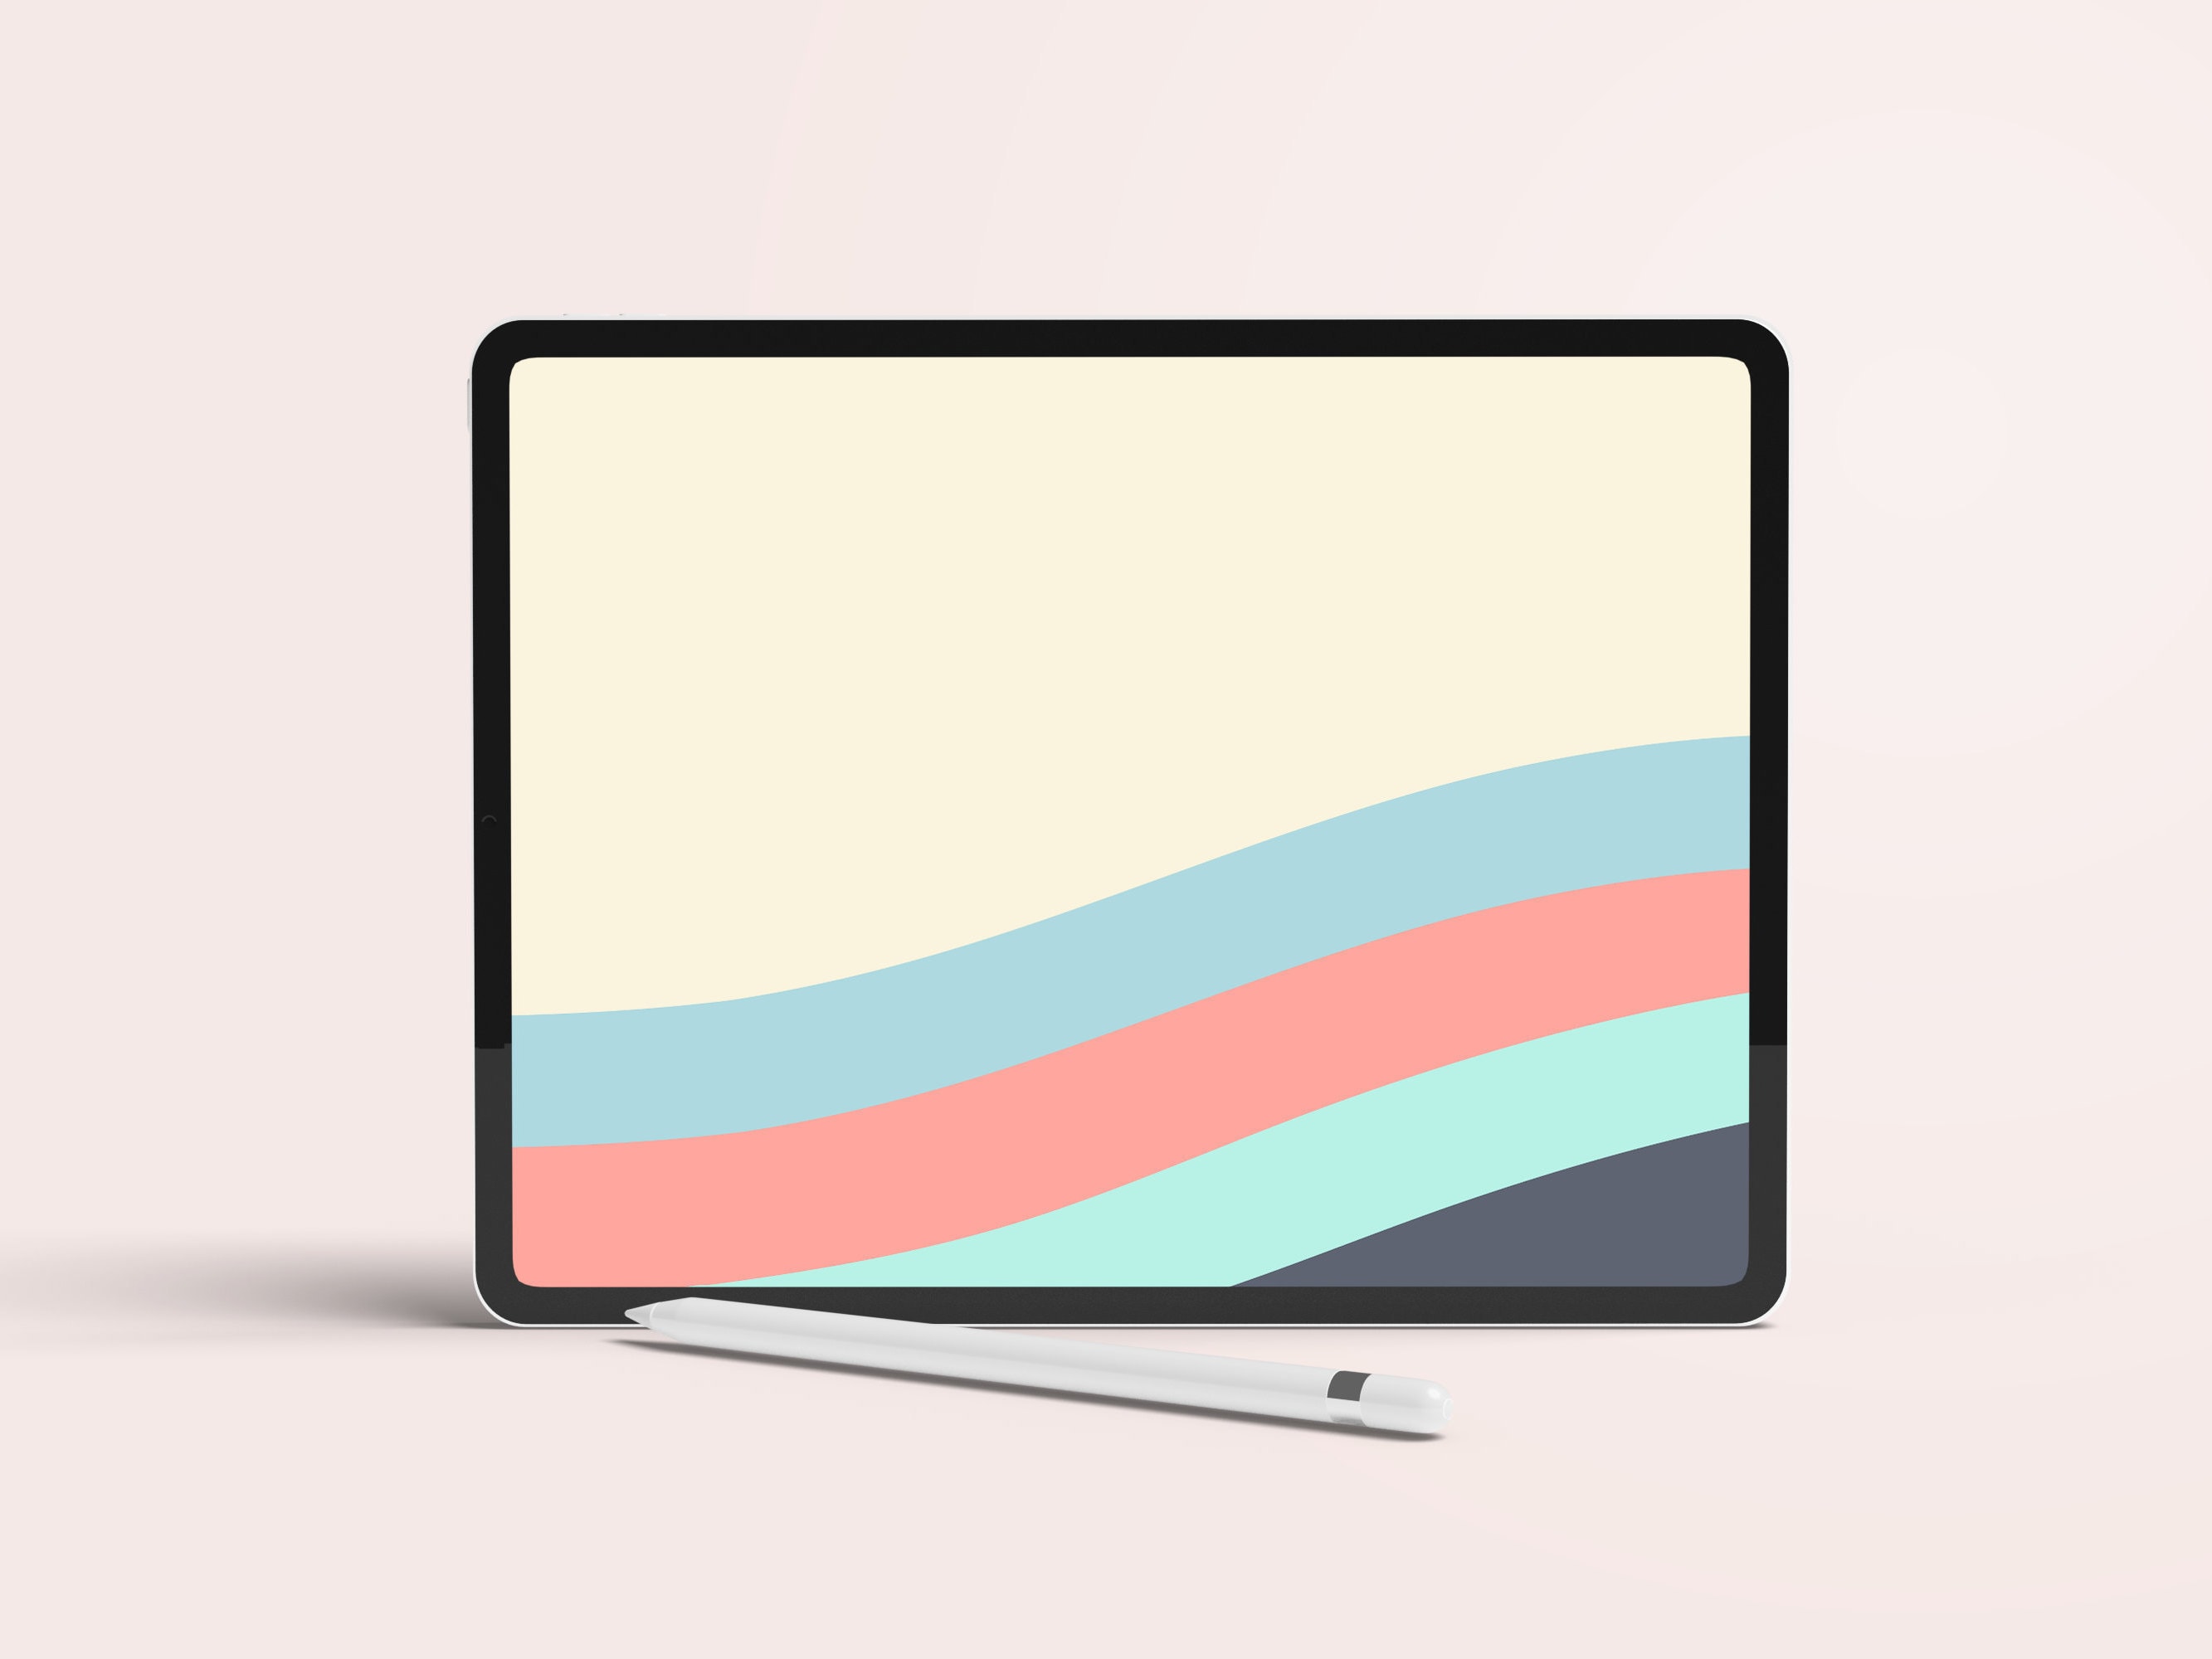 Aesthetic Retro iPad Wallpaper Background - Fun, Abstract, INSTANT  DOWNLOAD, iPad Background, Apple iPad Wallpaper, iPad Pro Wallpaper